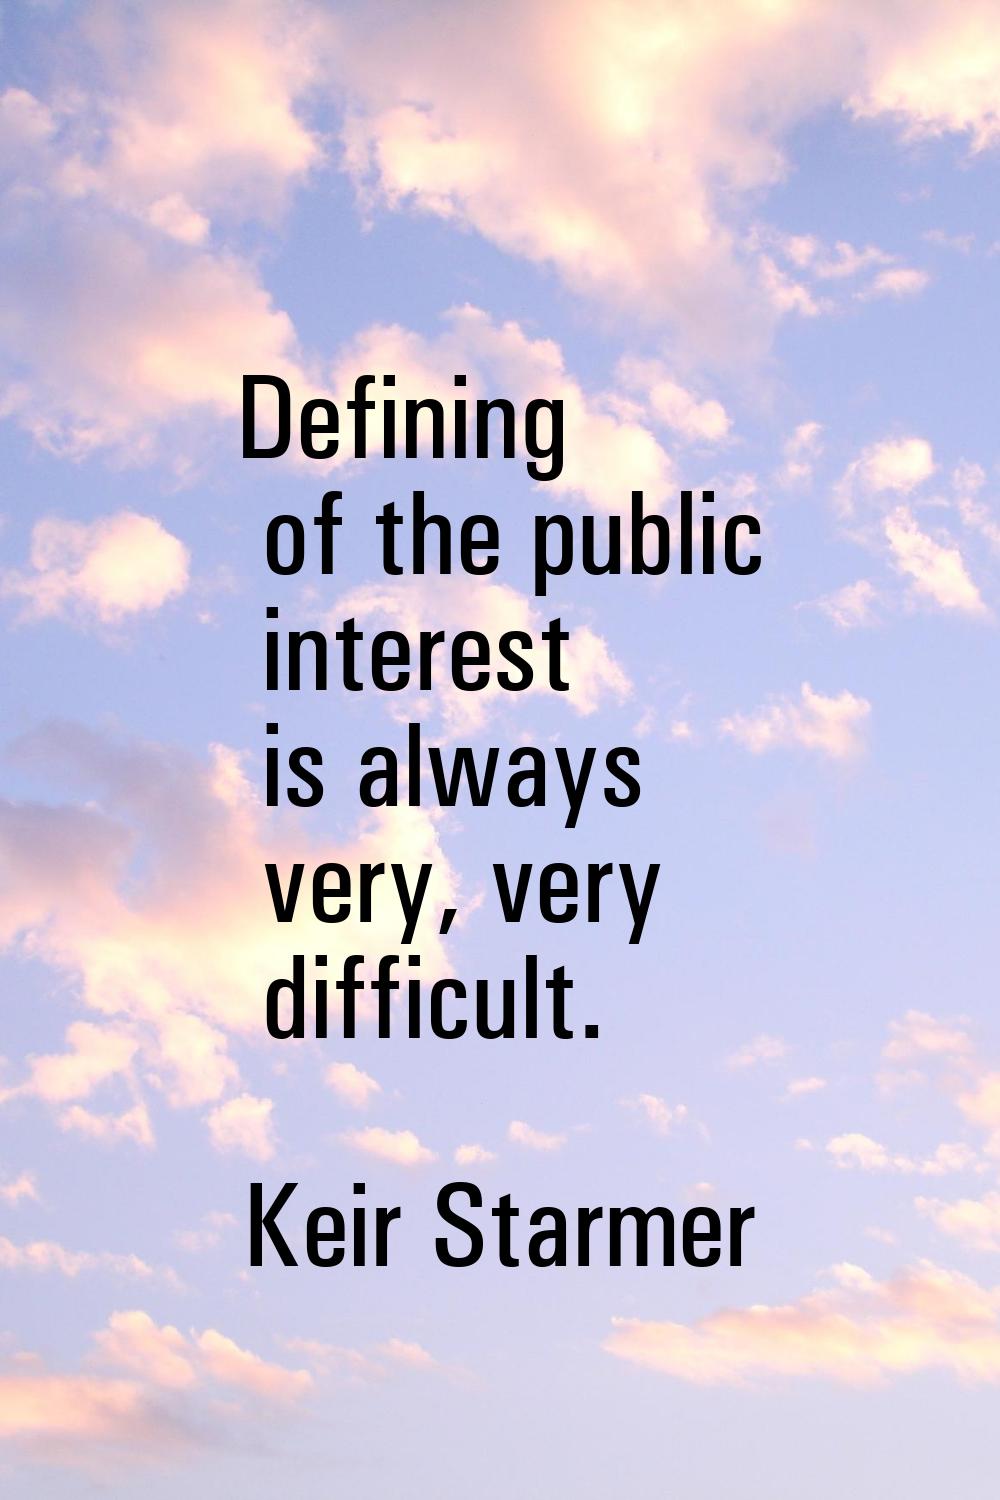 Defining of the public interest is always very, very difficult.